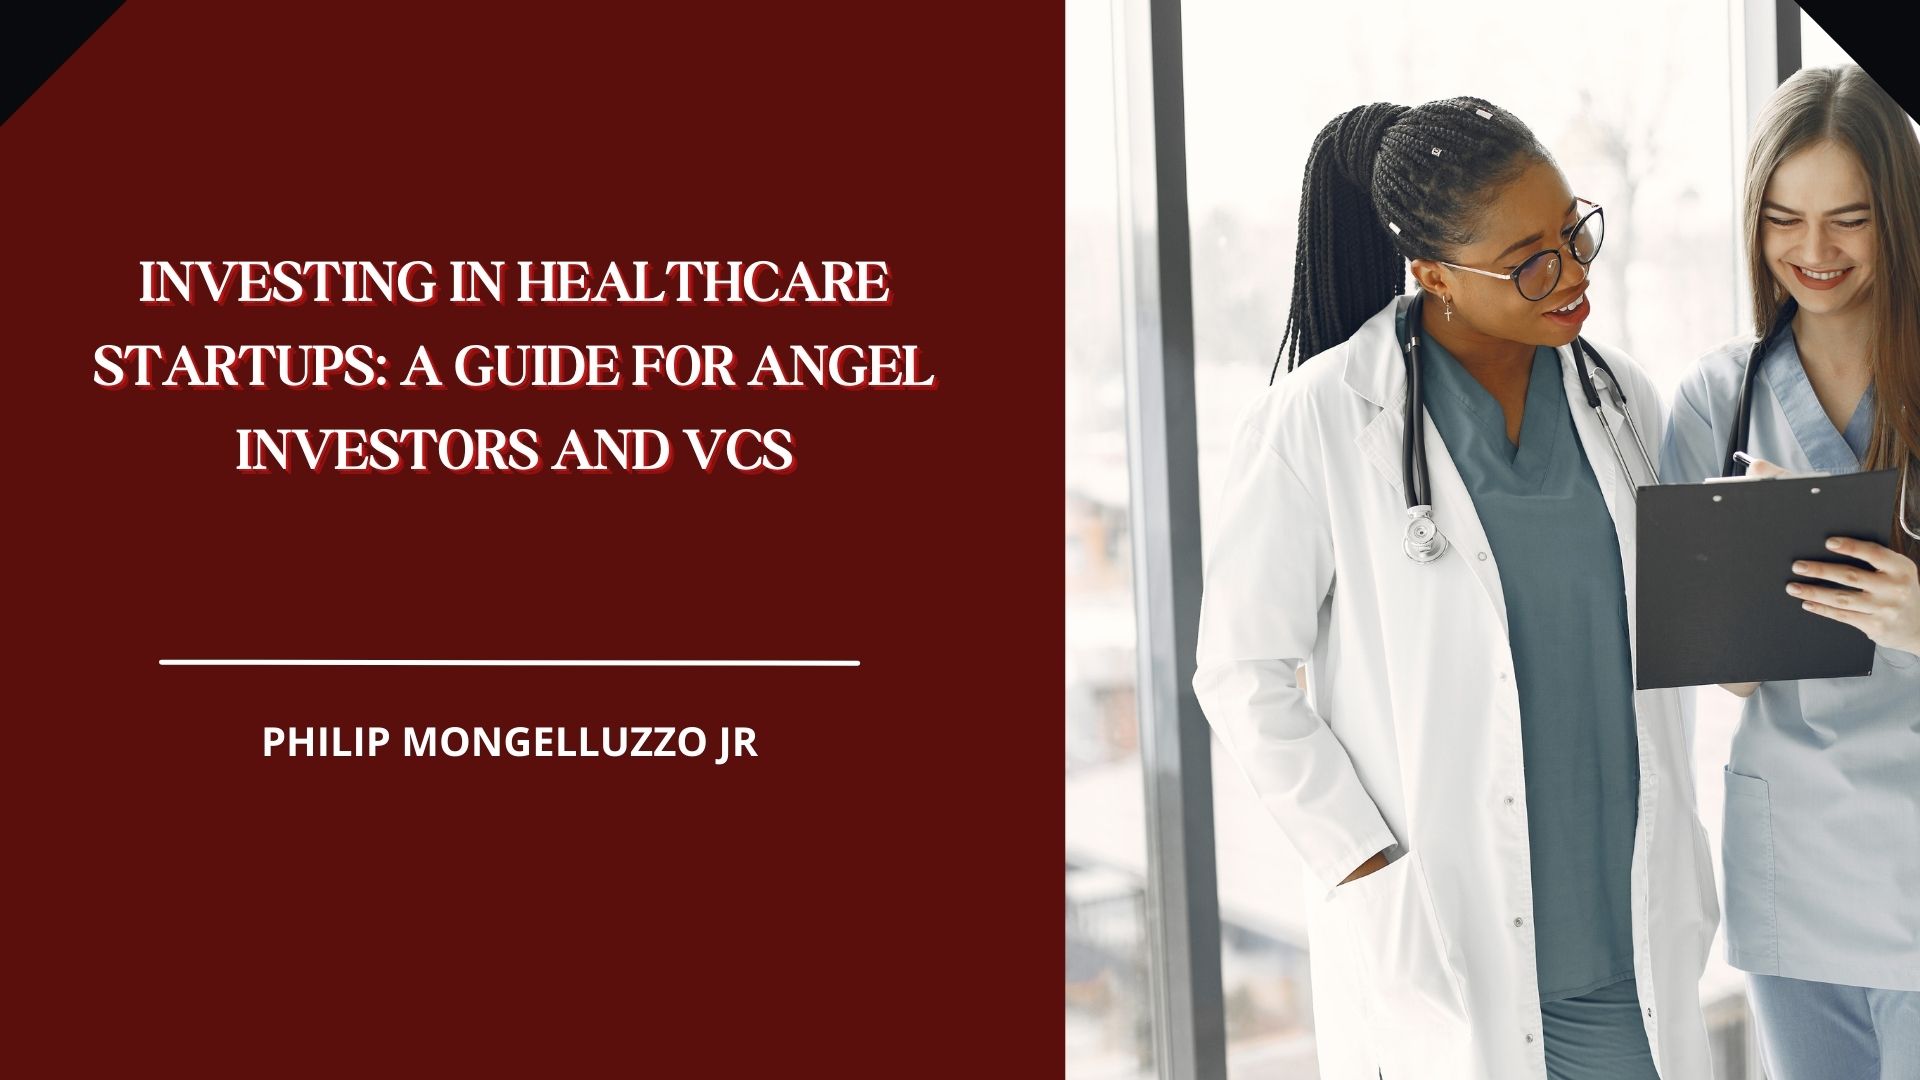 INVESTING IN HEALTHCARE
STARTUPS: A GUIDE FOR ANGEL
INVESTORS AND VCS

PHILIP MONGELLUZZO JR